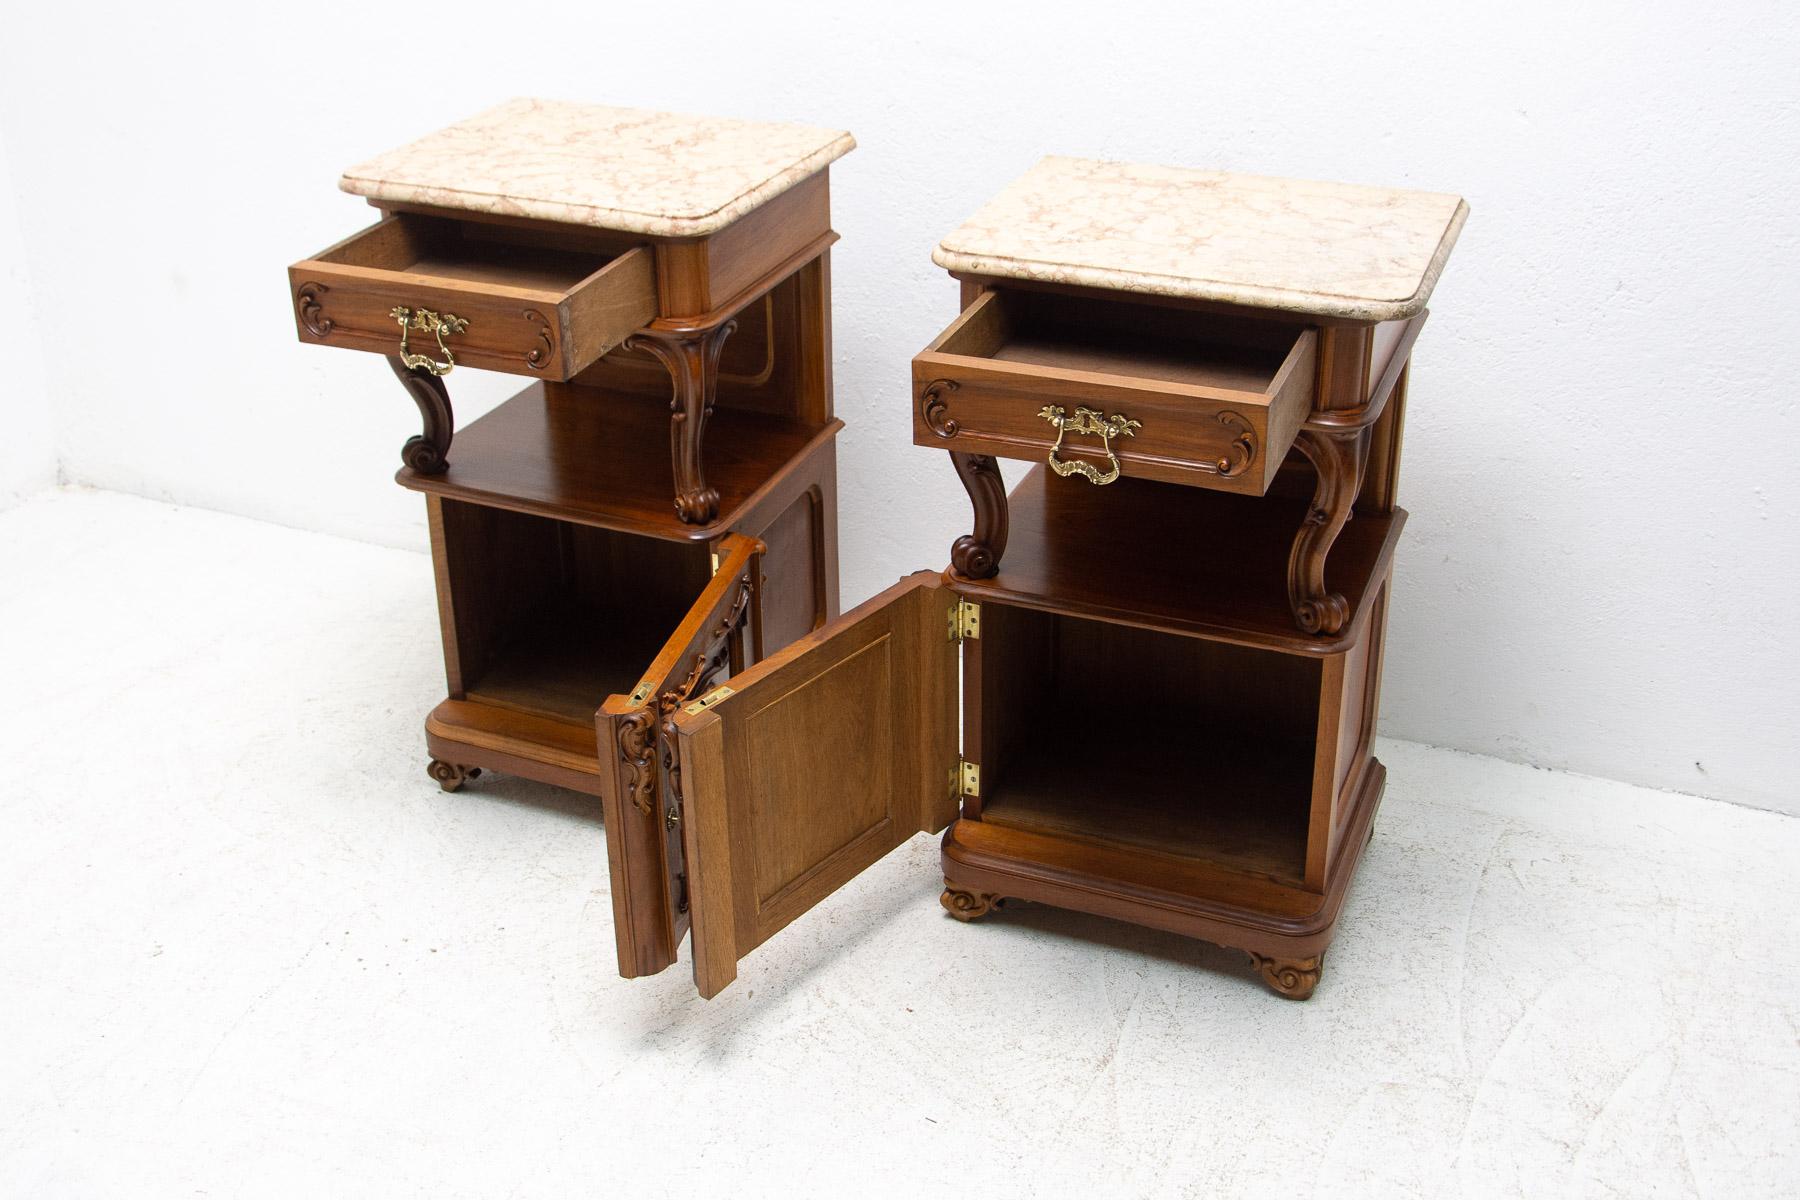 Pair of Fully Restored Historicist Bedside Tables, 1910, Austria For Sale 3